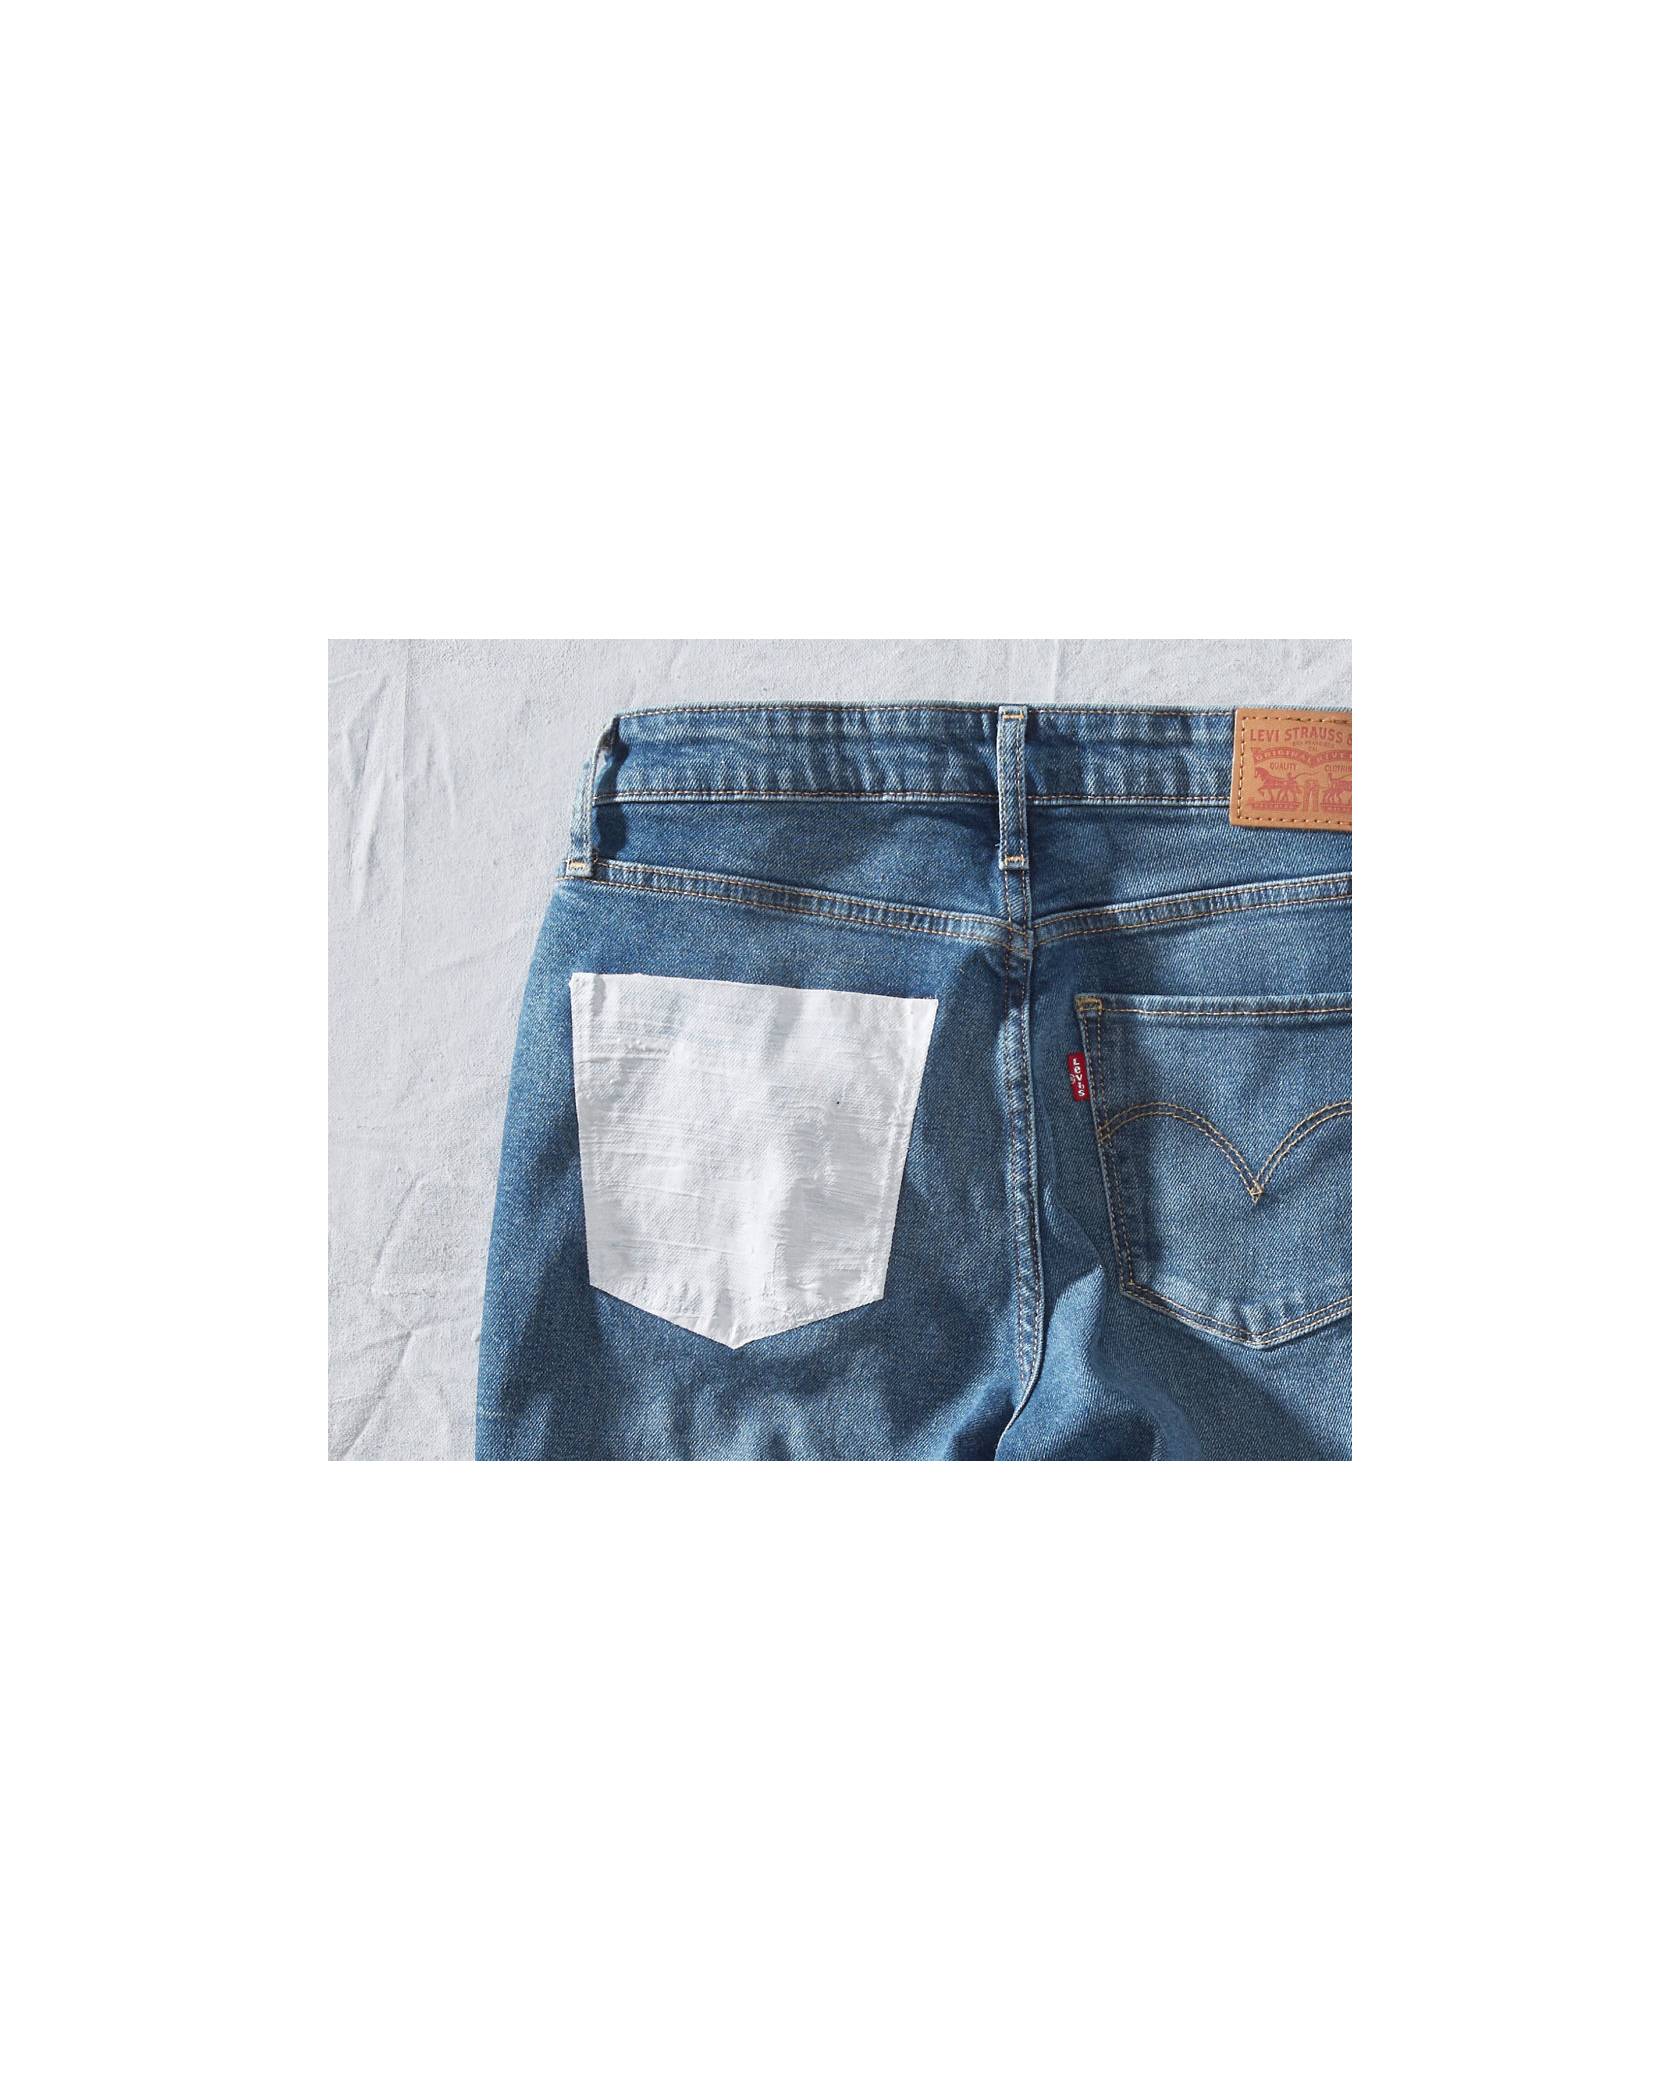 painted pocket jeans